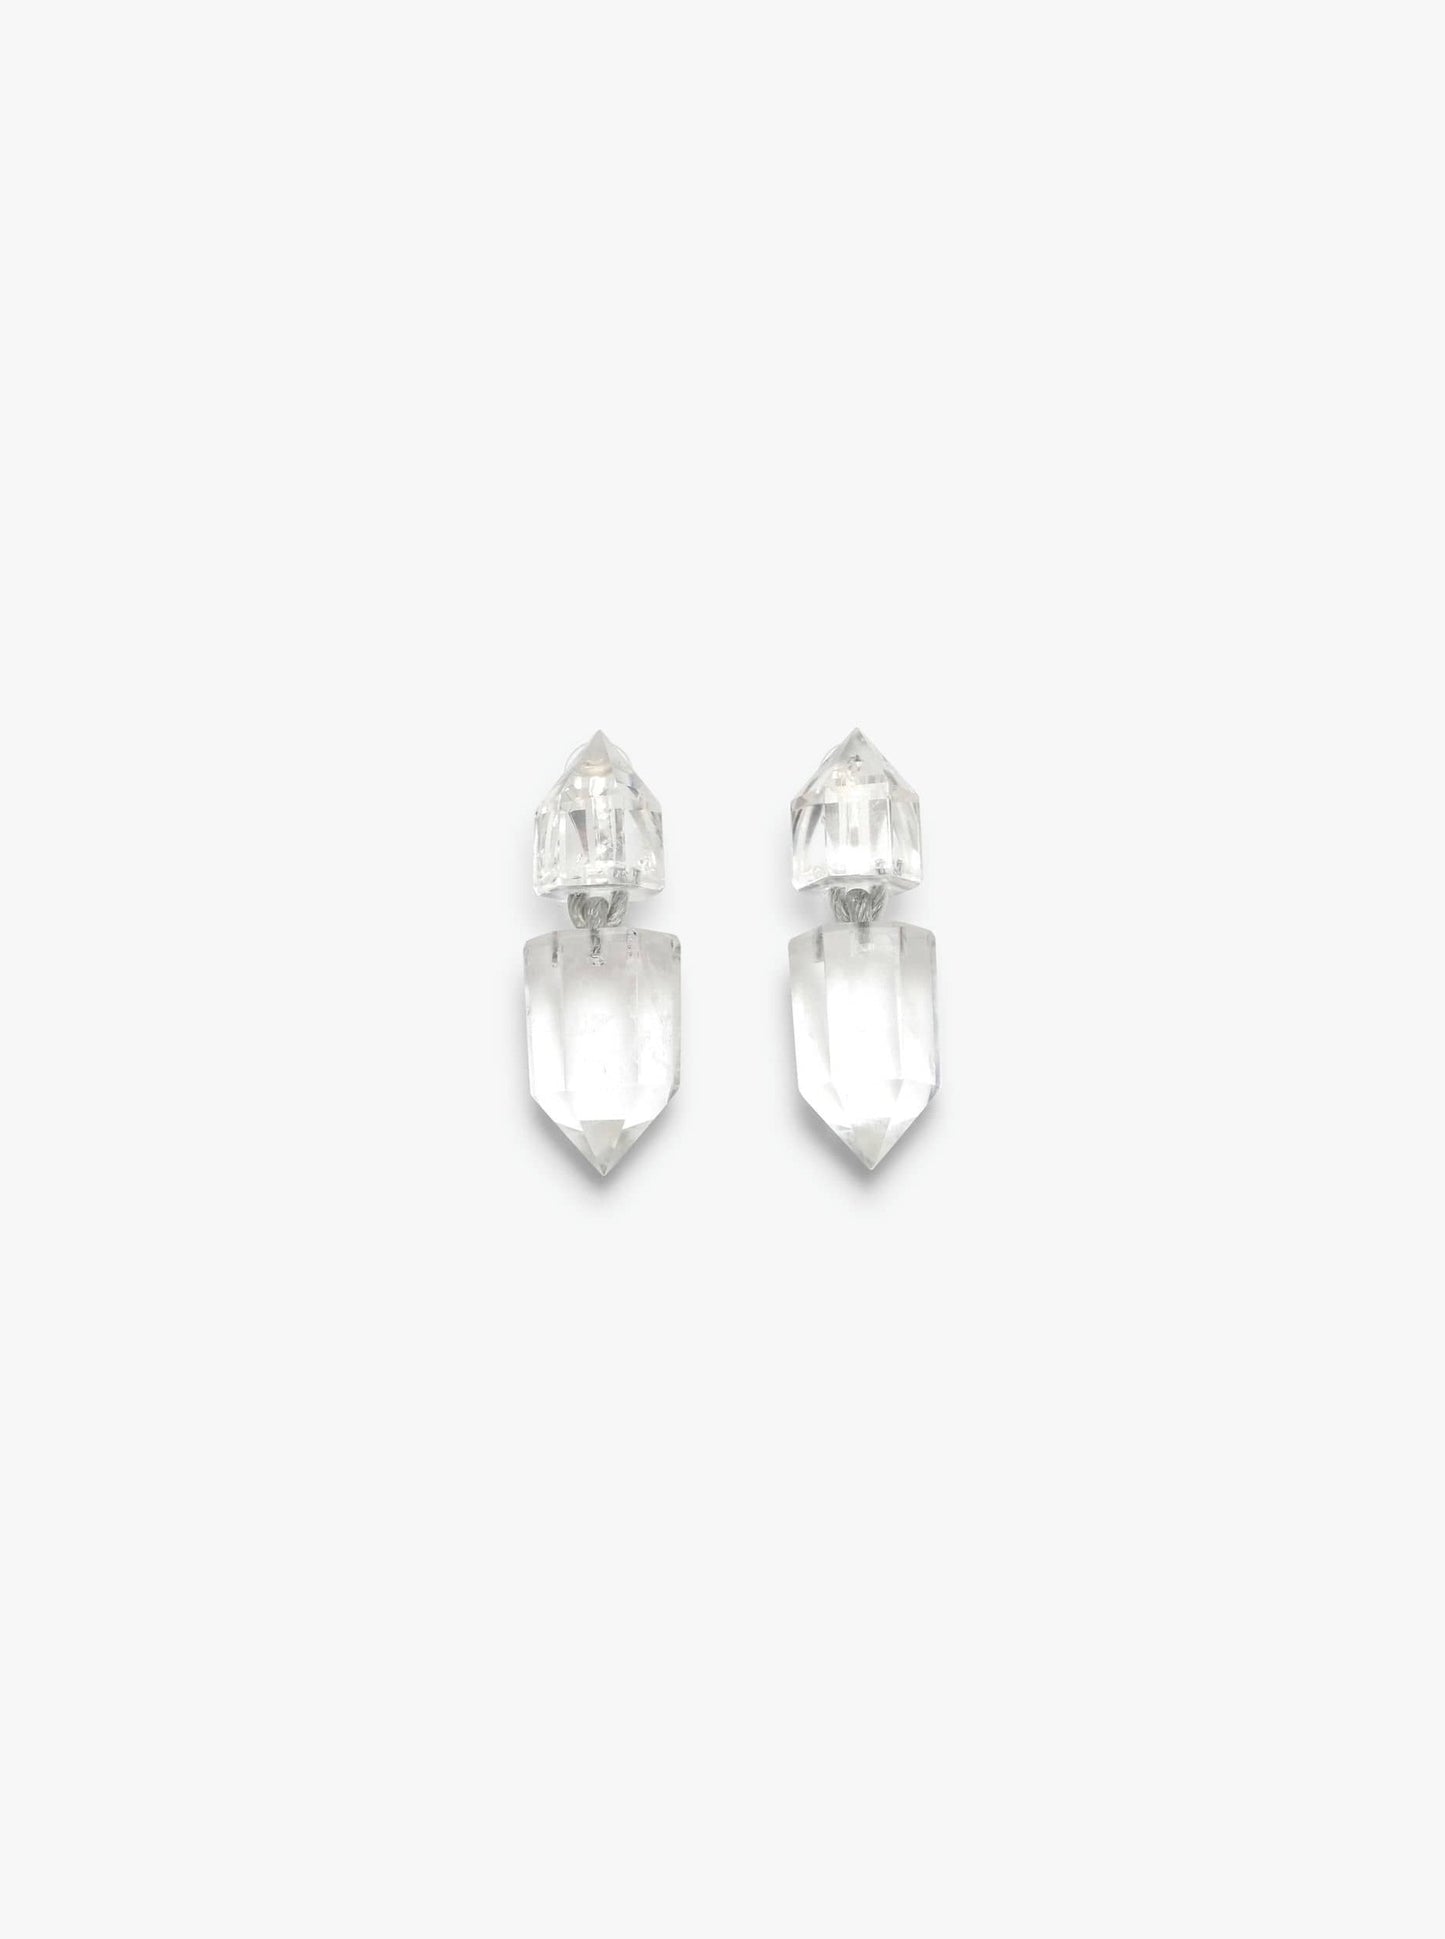 Mint earclips: mountain crystal, wire